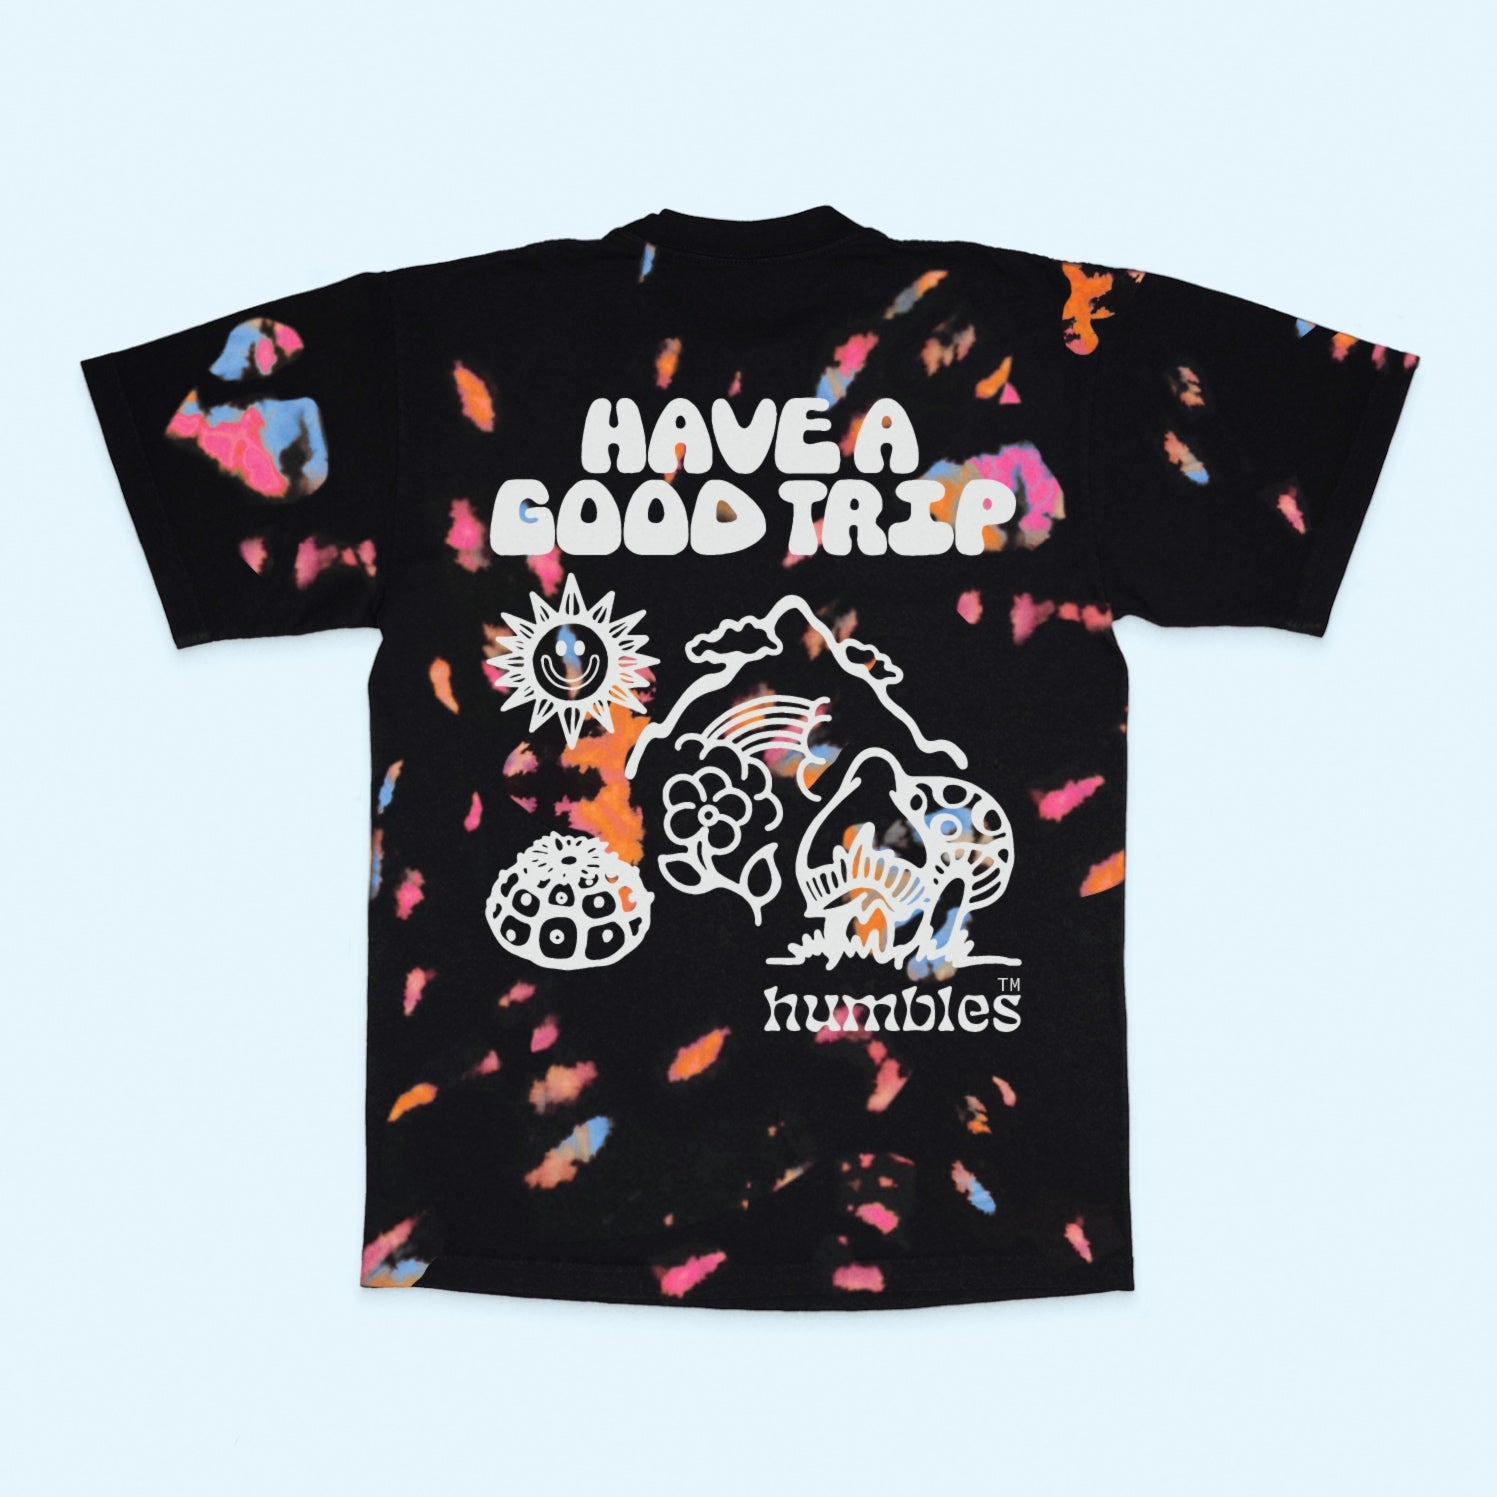 “Have a good trip” v3 collection